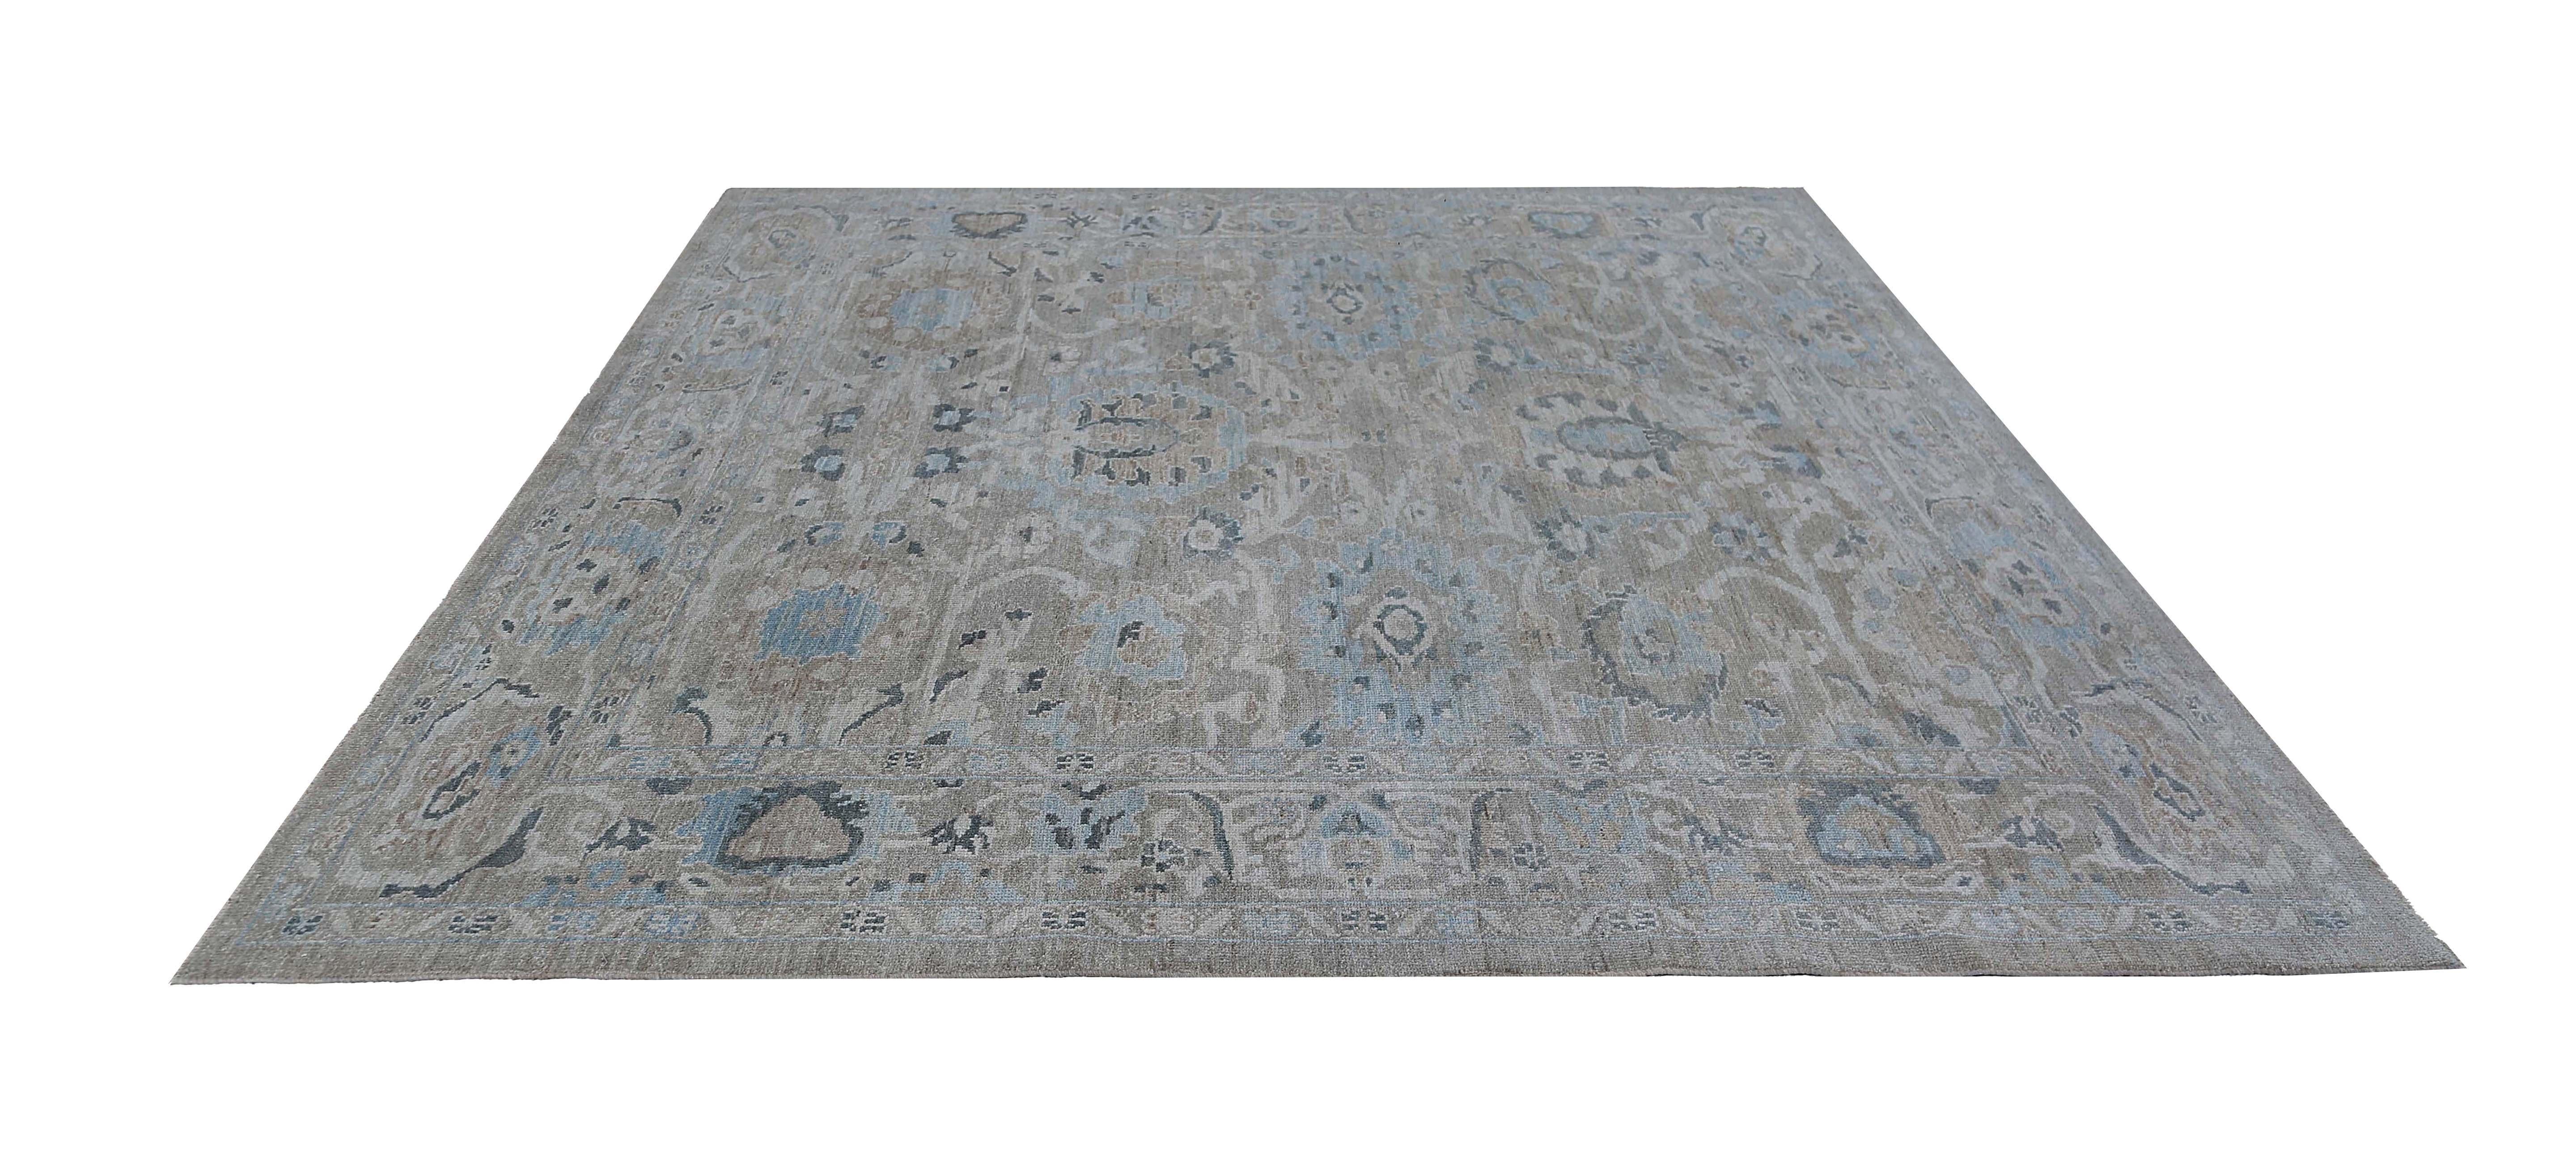 Transform your home decor with our exquisite 6.8'' x 10.3'' Grey Blue Oushak rug. Handwoven from premium quality wool, this rug features a stunning blend of grey and blue tones, creating a soft and soothing ambiance in any room.

The intricate